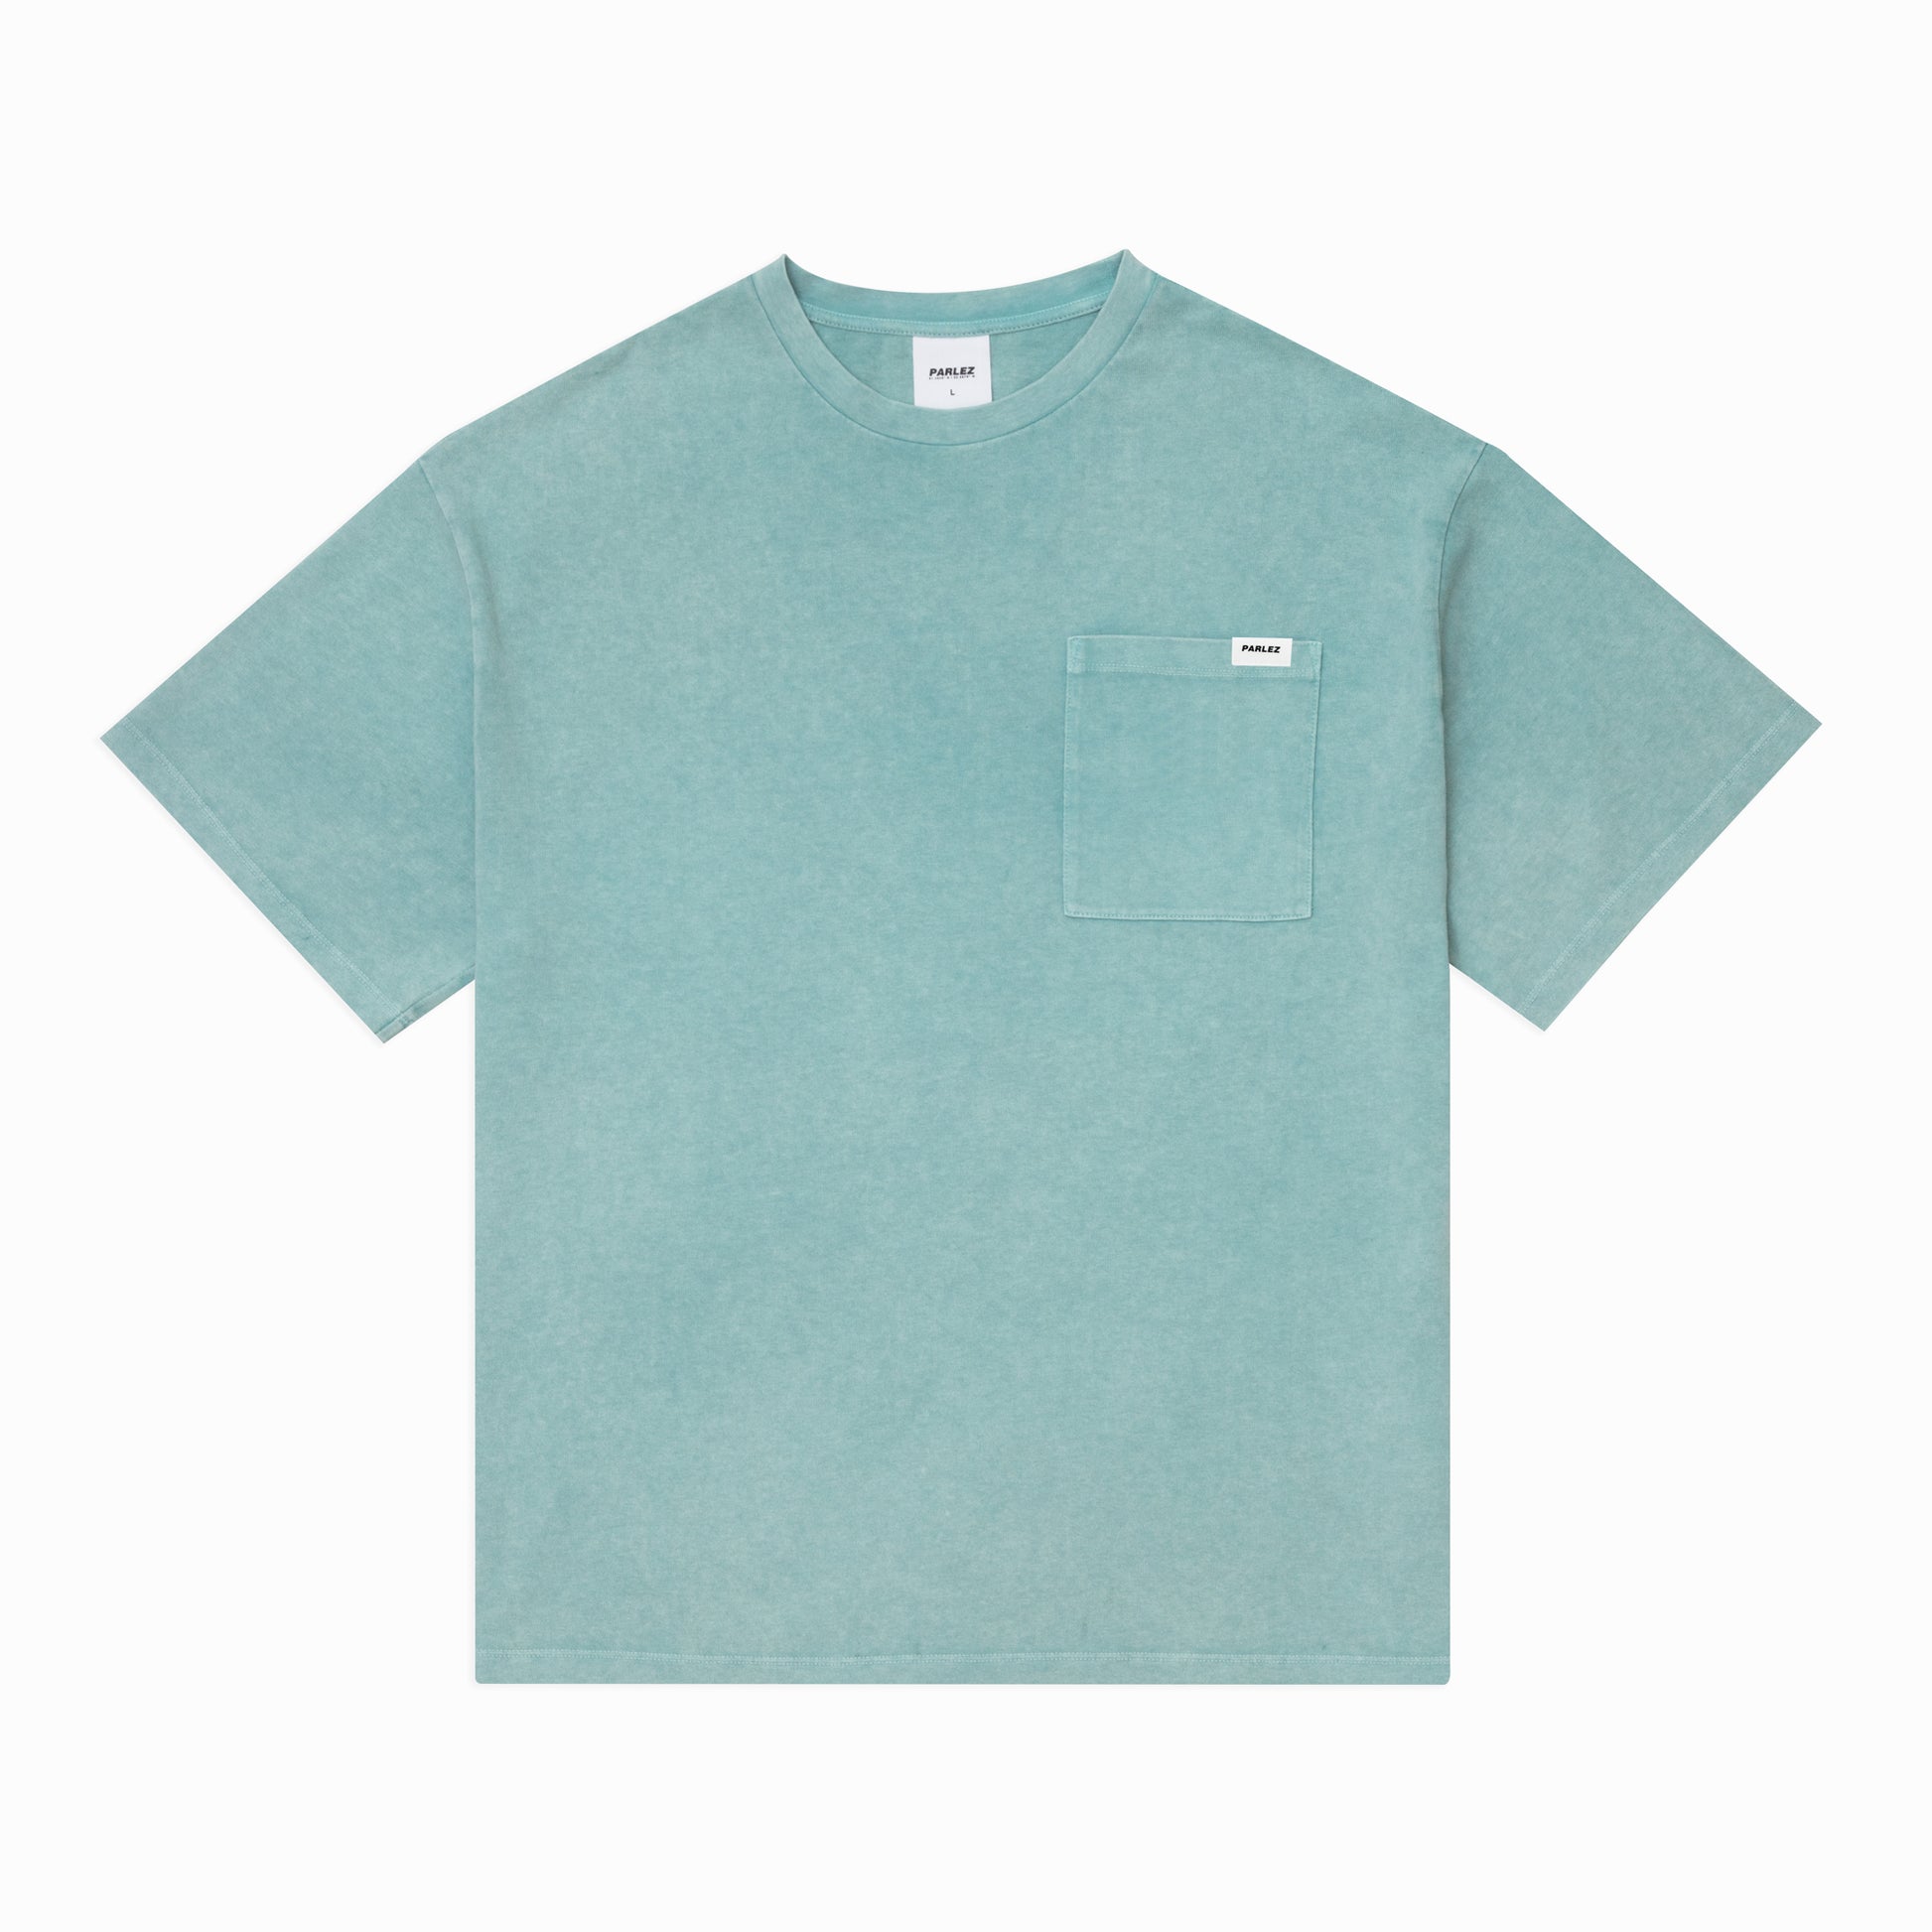 The Mens Trelow Oversized Pigment Pocket Tee Aqua Washed from Parlez clothing